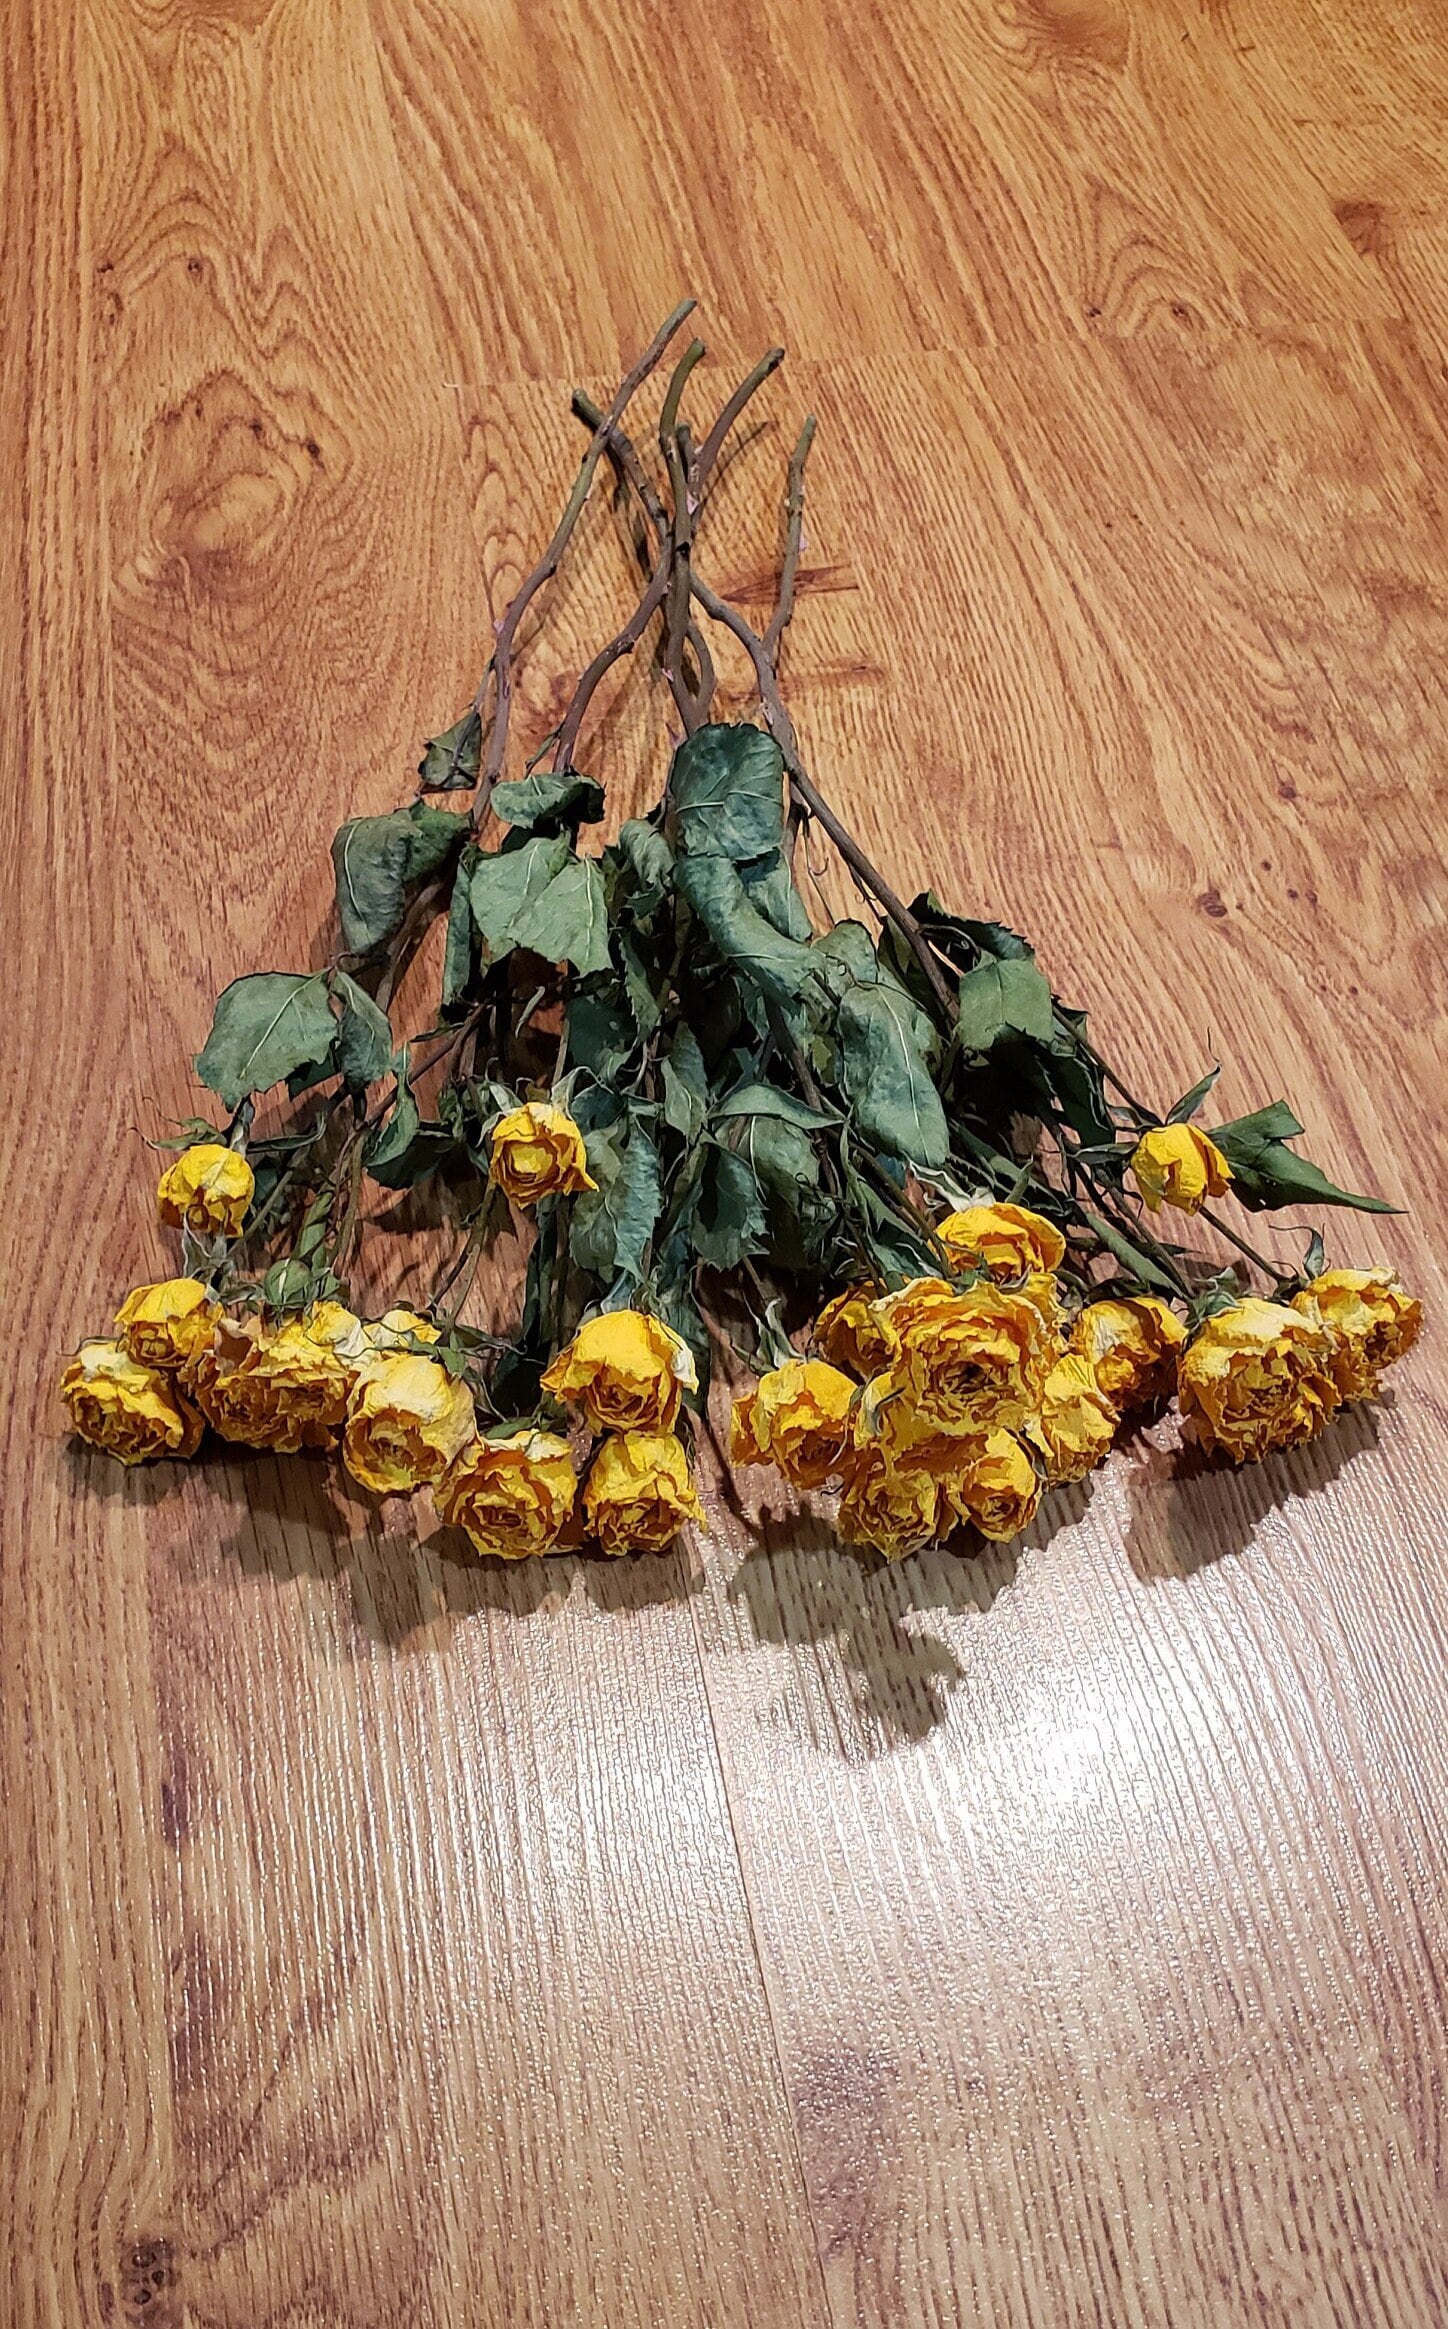 Dried Roses Wall Decor, Rustic Hanging Flowers